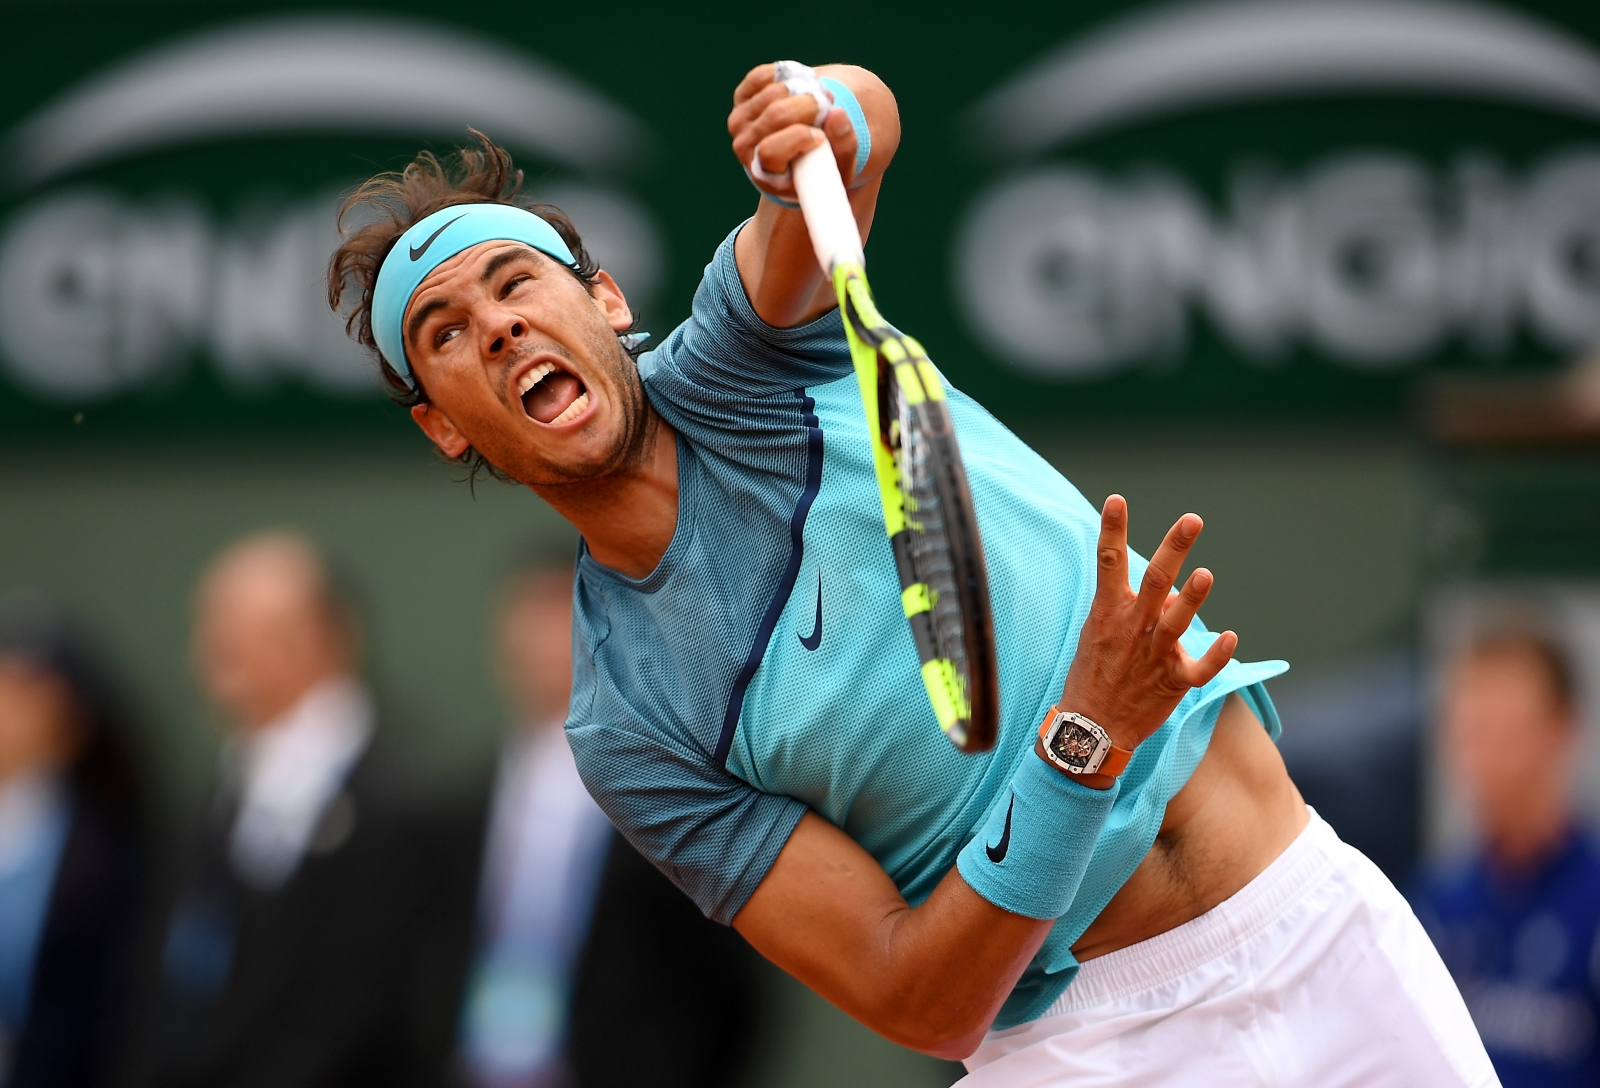 Rafael Nadal vs Andrey Kuznetsov, US Open 2016: Watch live, preview and betting odds1600 x 1088